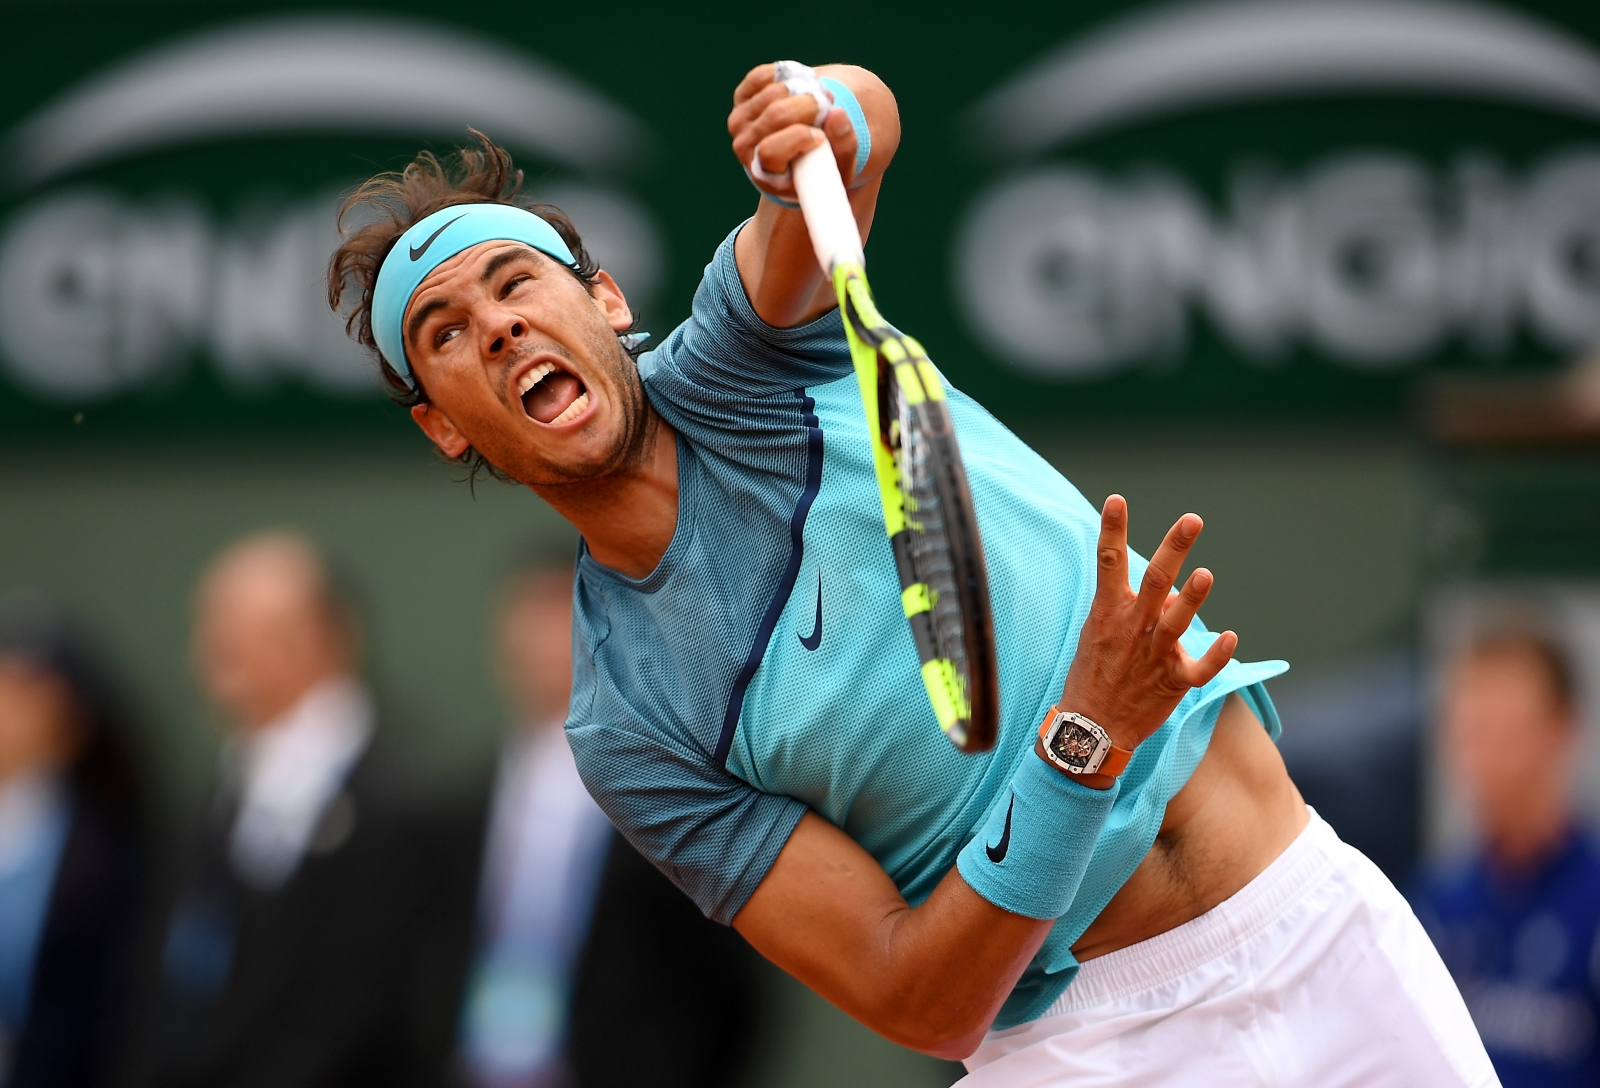 Rafael Nadal vs Andrey Kuznetsov, US Open 2016: Watch live, preview and betting odds1600 x 1088